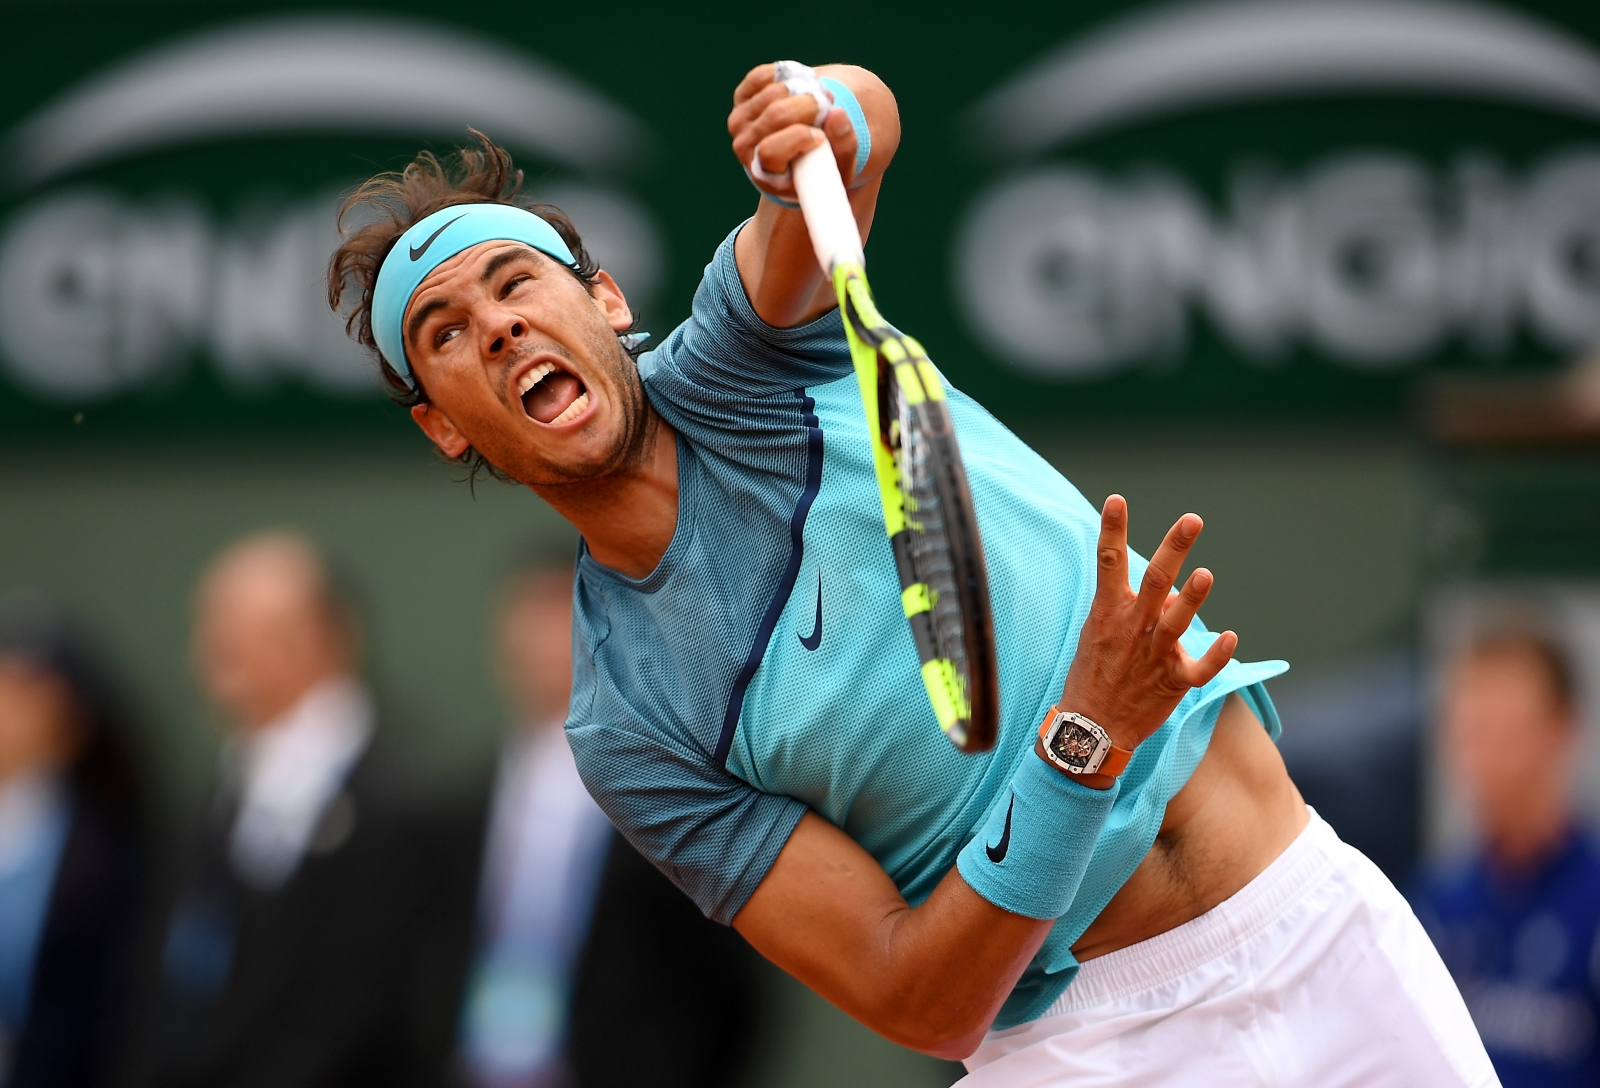 Rafael Nadal vs Andrey Kuznetsov, US Open 2016: Watch live, preview and betting odds1600 x 1088